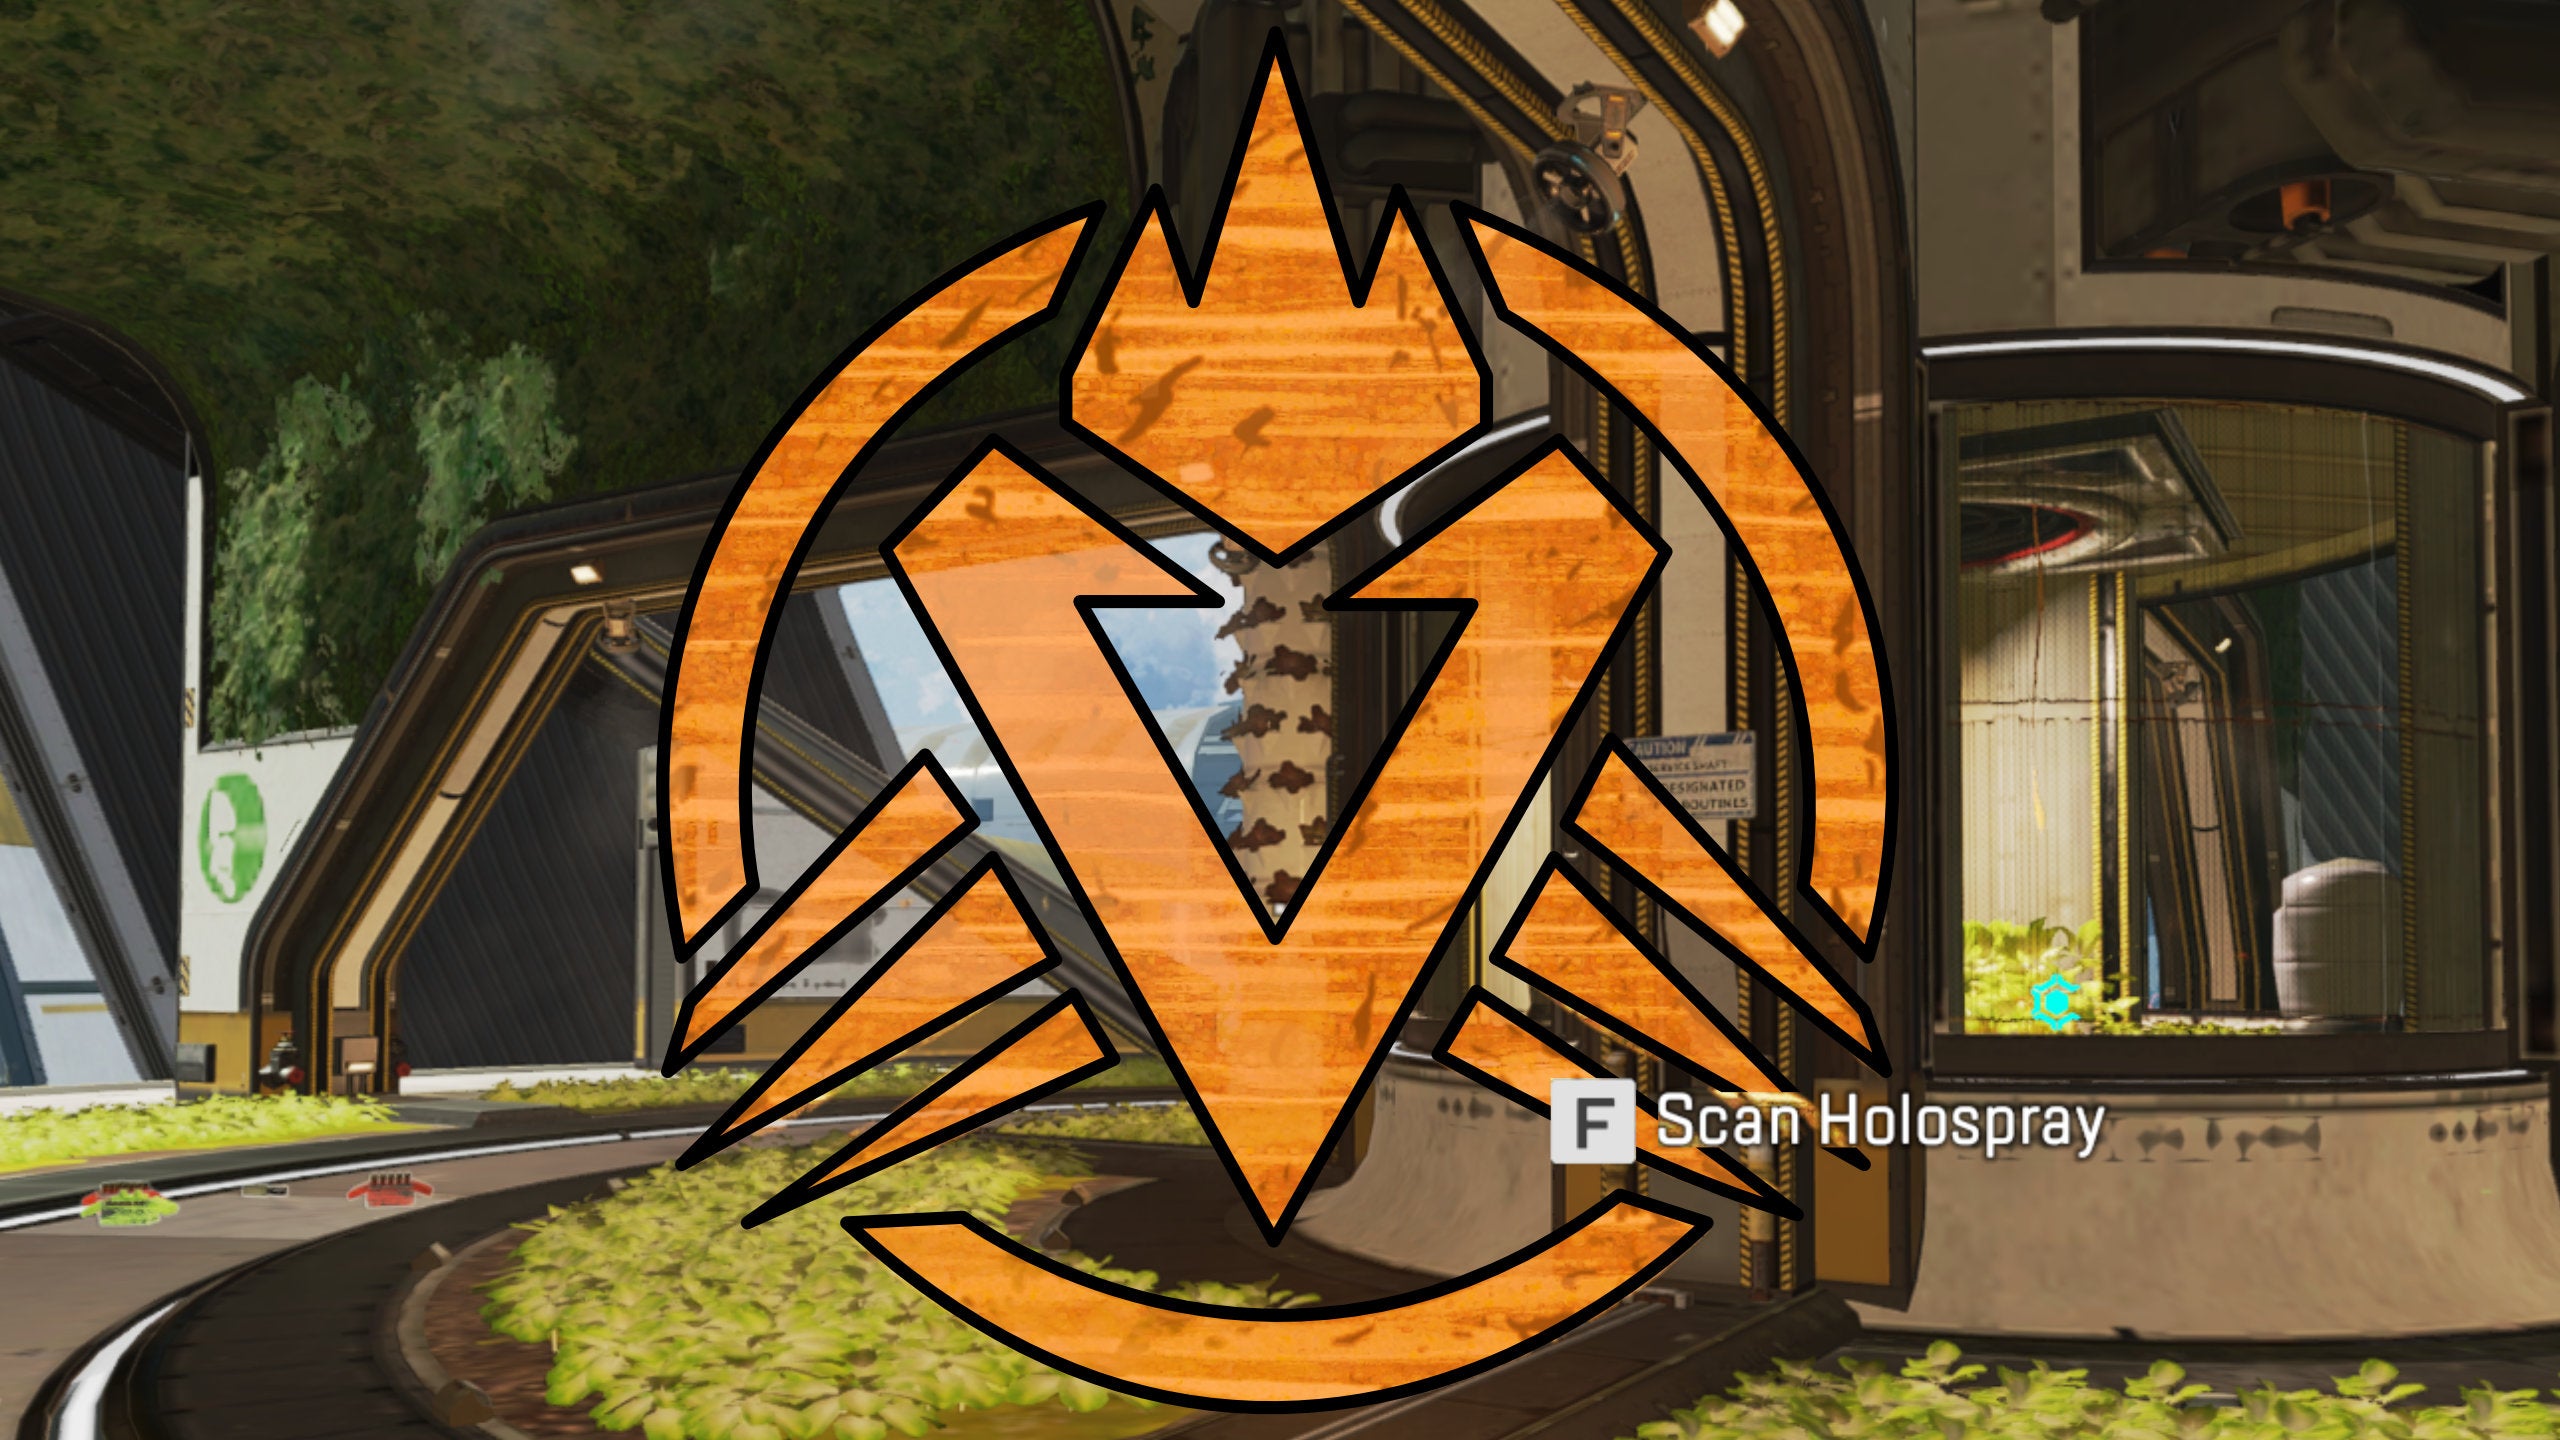 A screenshot of one of the Season 9 teaser holo sprays in Apex Legends. The image has been edited to highlight the holo spray symbol.